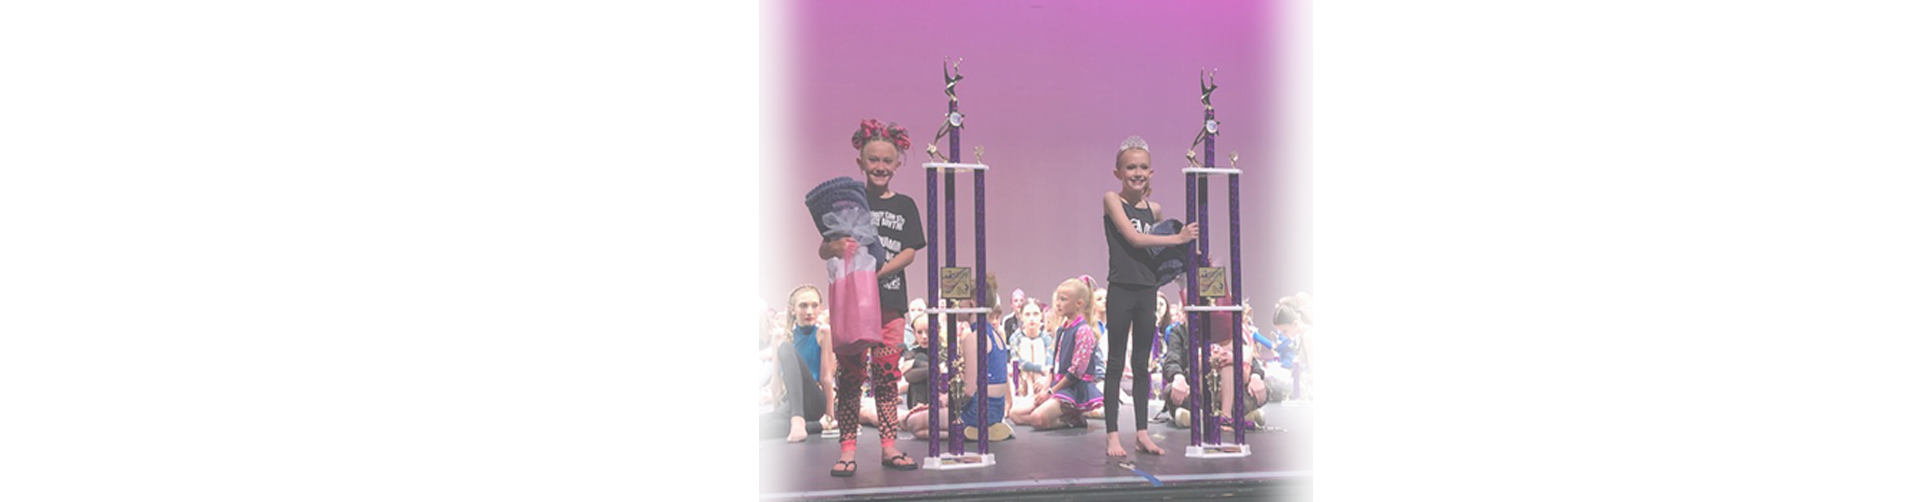 Personalized Awards at Aspire Dance Pro Competitions